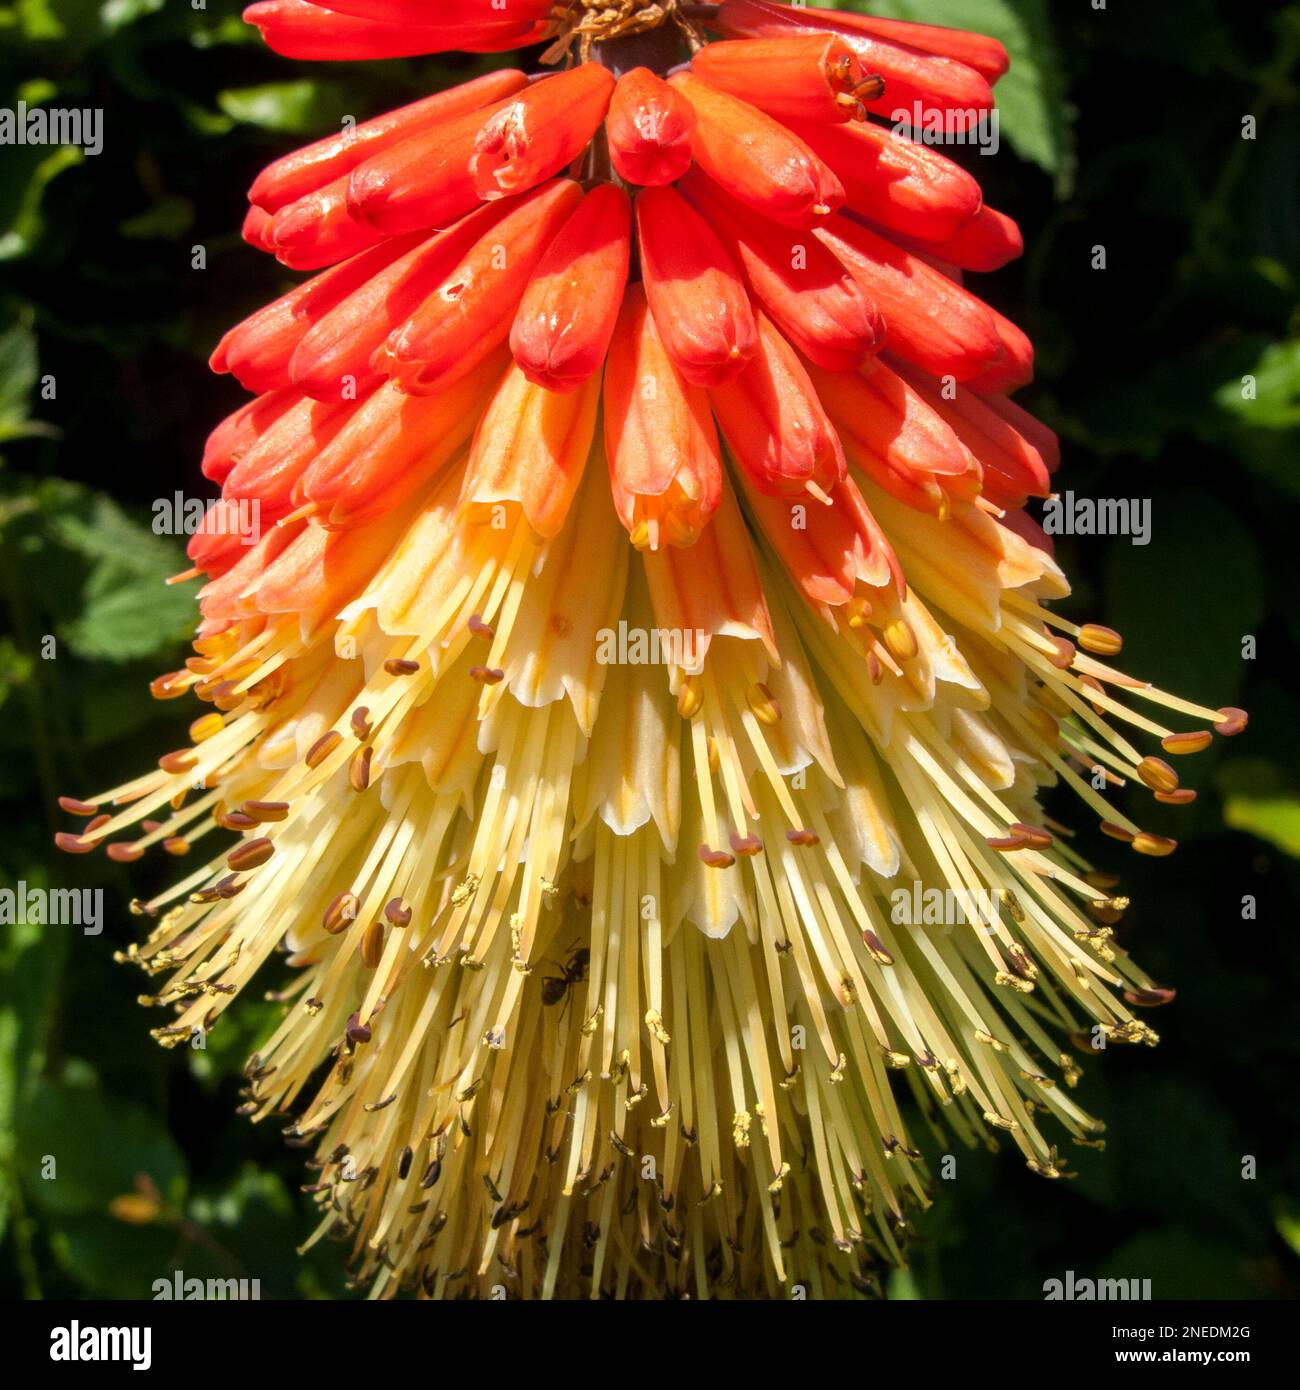 UK, England, Devon. A cottage garden. 27th May. Red Hot Poker (Kniphofia Flamenco). Stock Photo